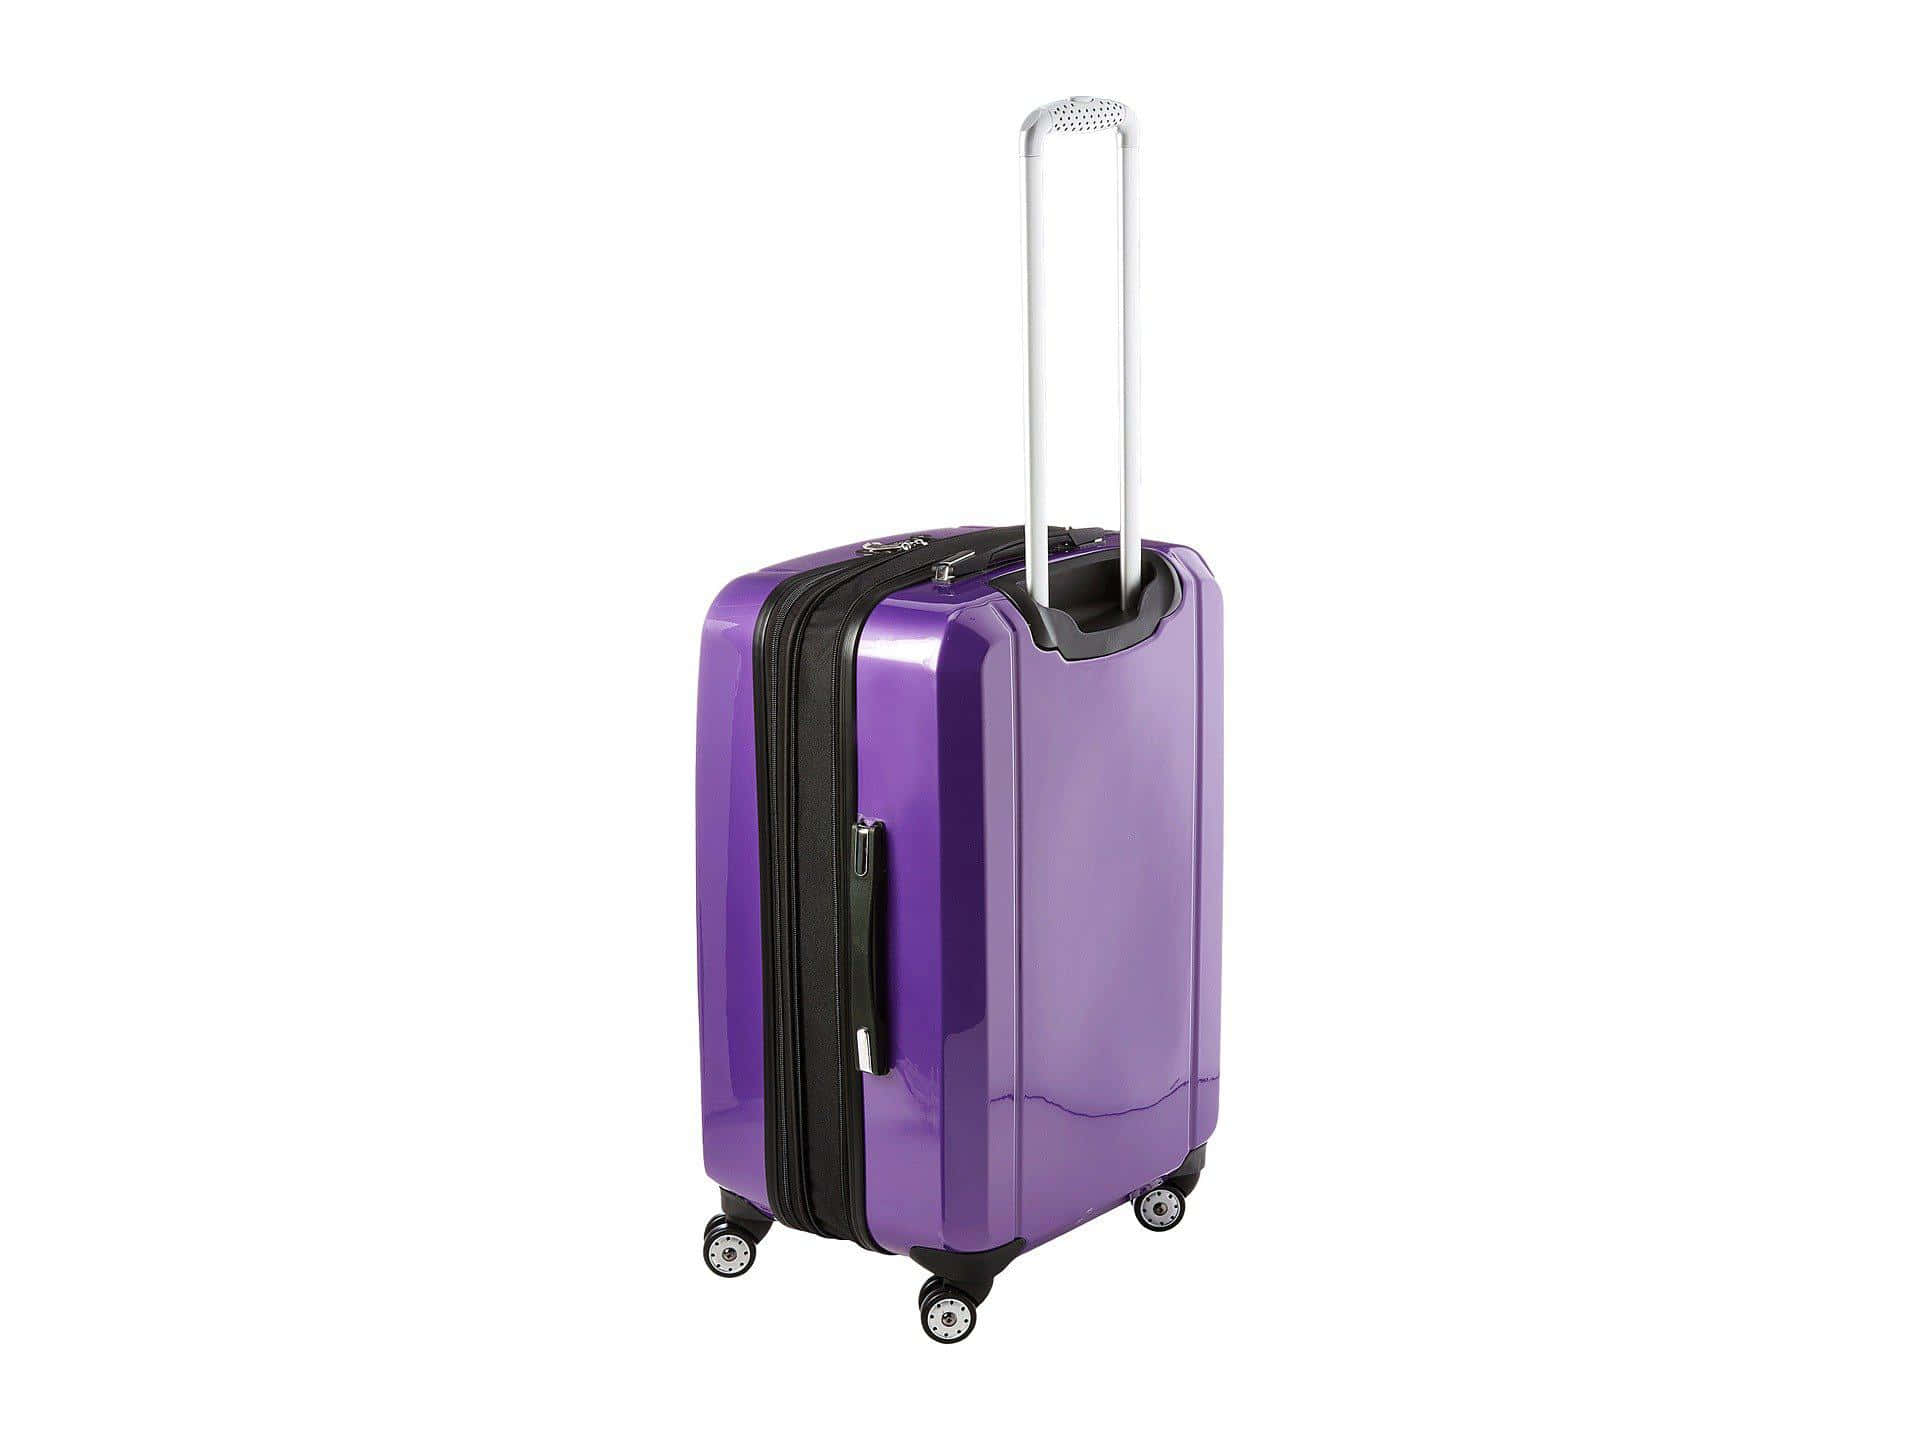 Image  A close-up of purple luggage, ready for travel Wallpaper